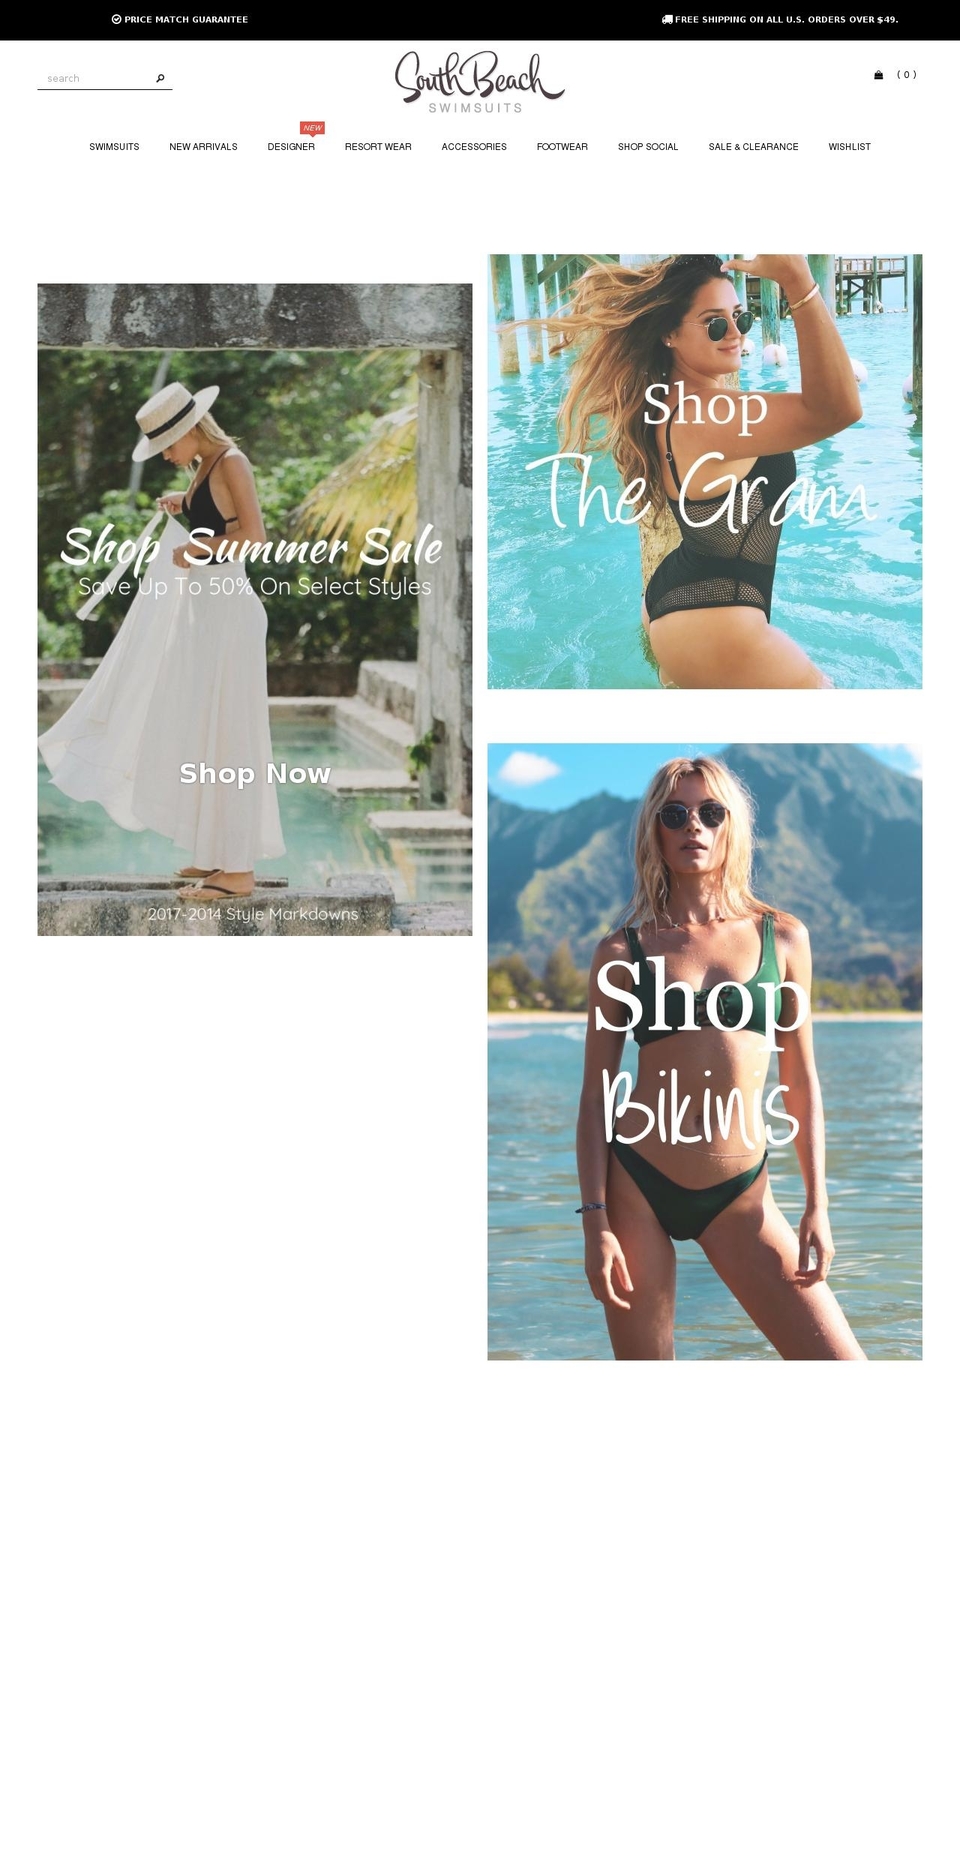 Made With ❤ By Minion Made - Updated Checkout Shopify theme site example shopsouthbeachswimsuits.com